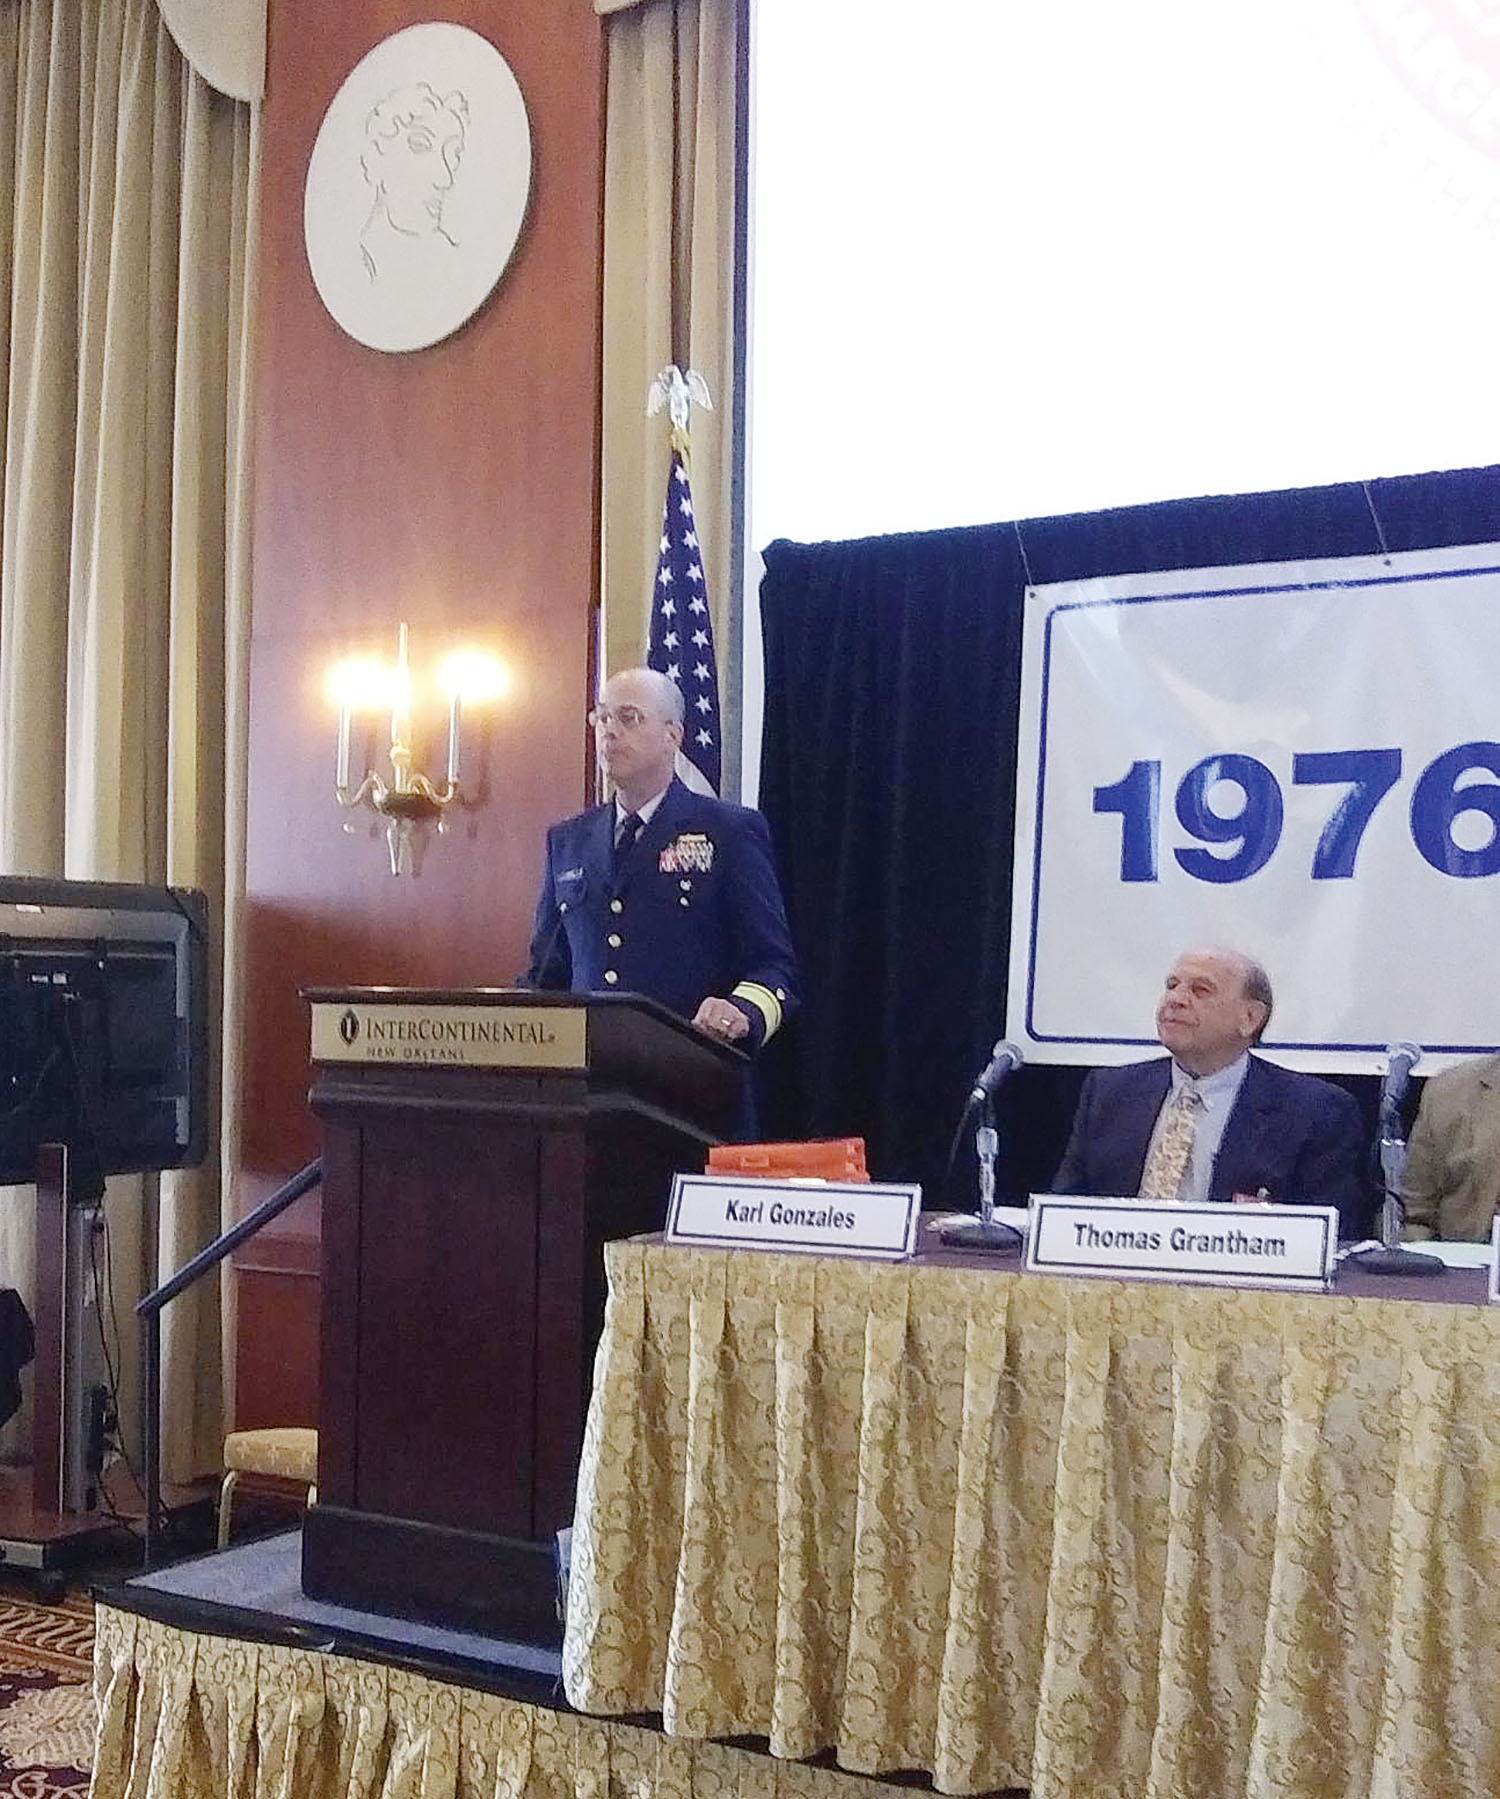 Rear Adm. Rich Timme gave the keynote address at the recent GNOBFA seminar in New Orleans. (Photo by David Murray)